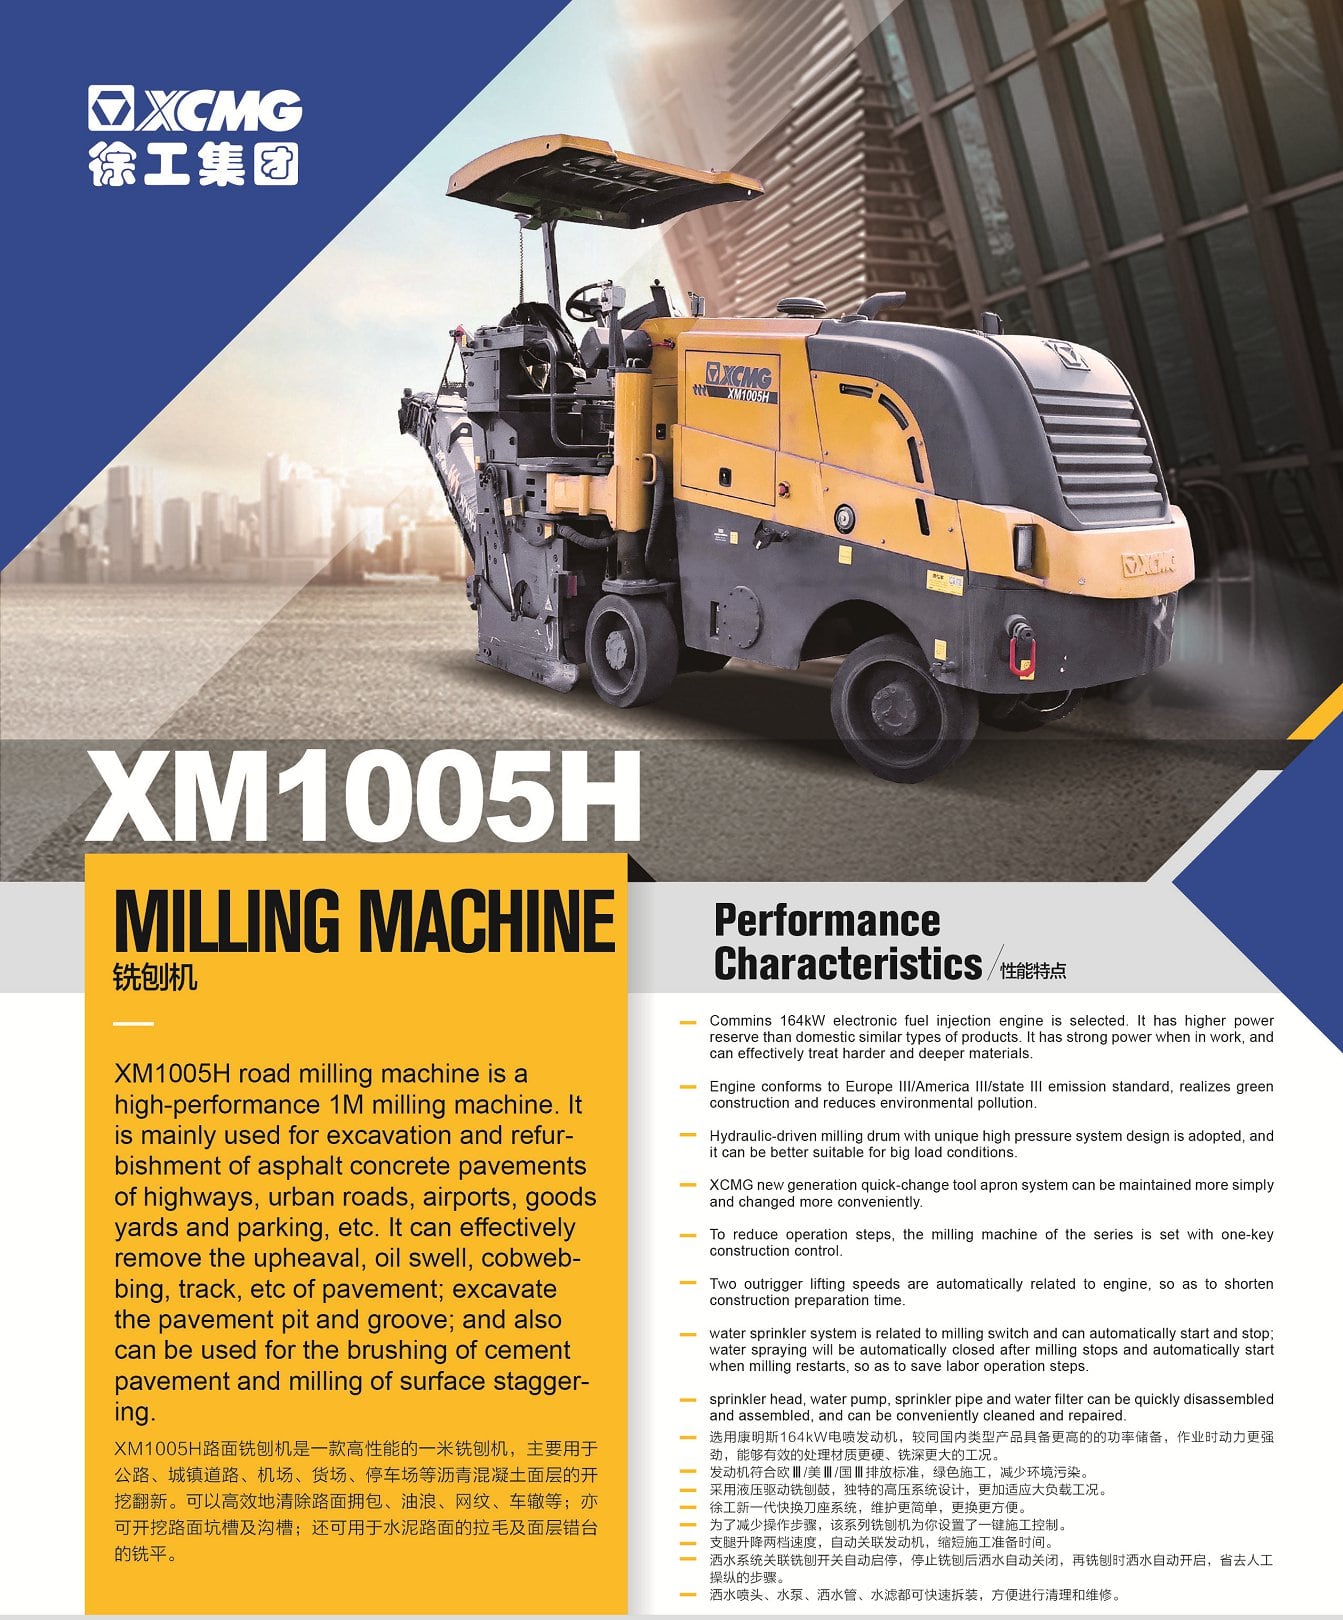 XCMG Official XM1005H Road Milling Machine for sale